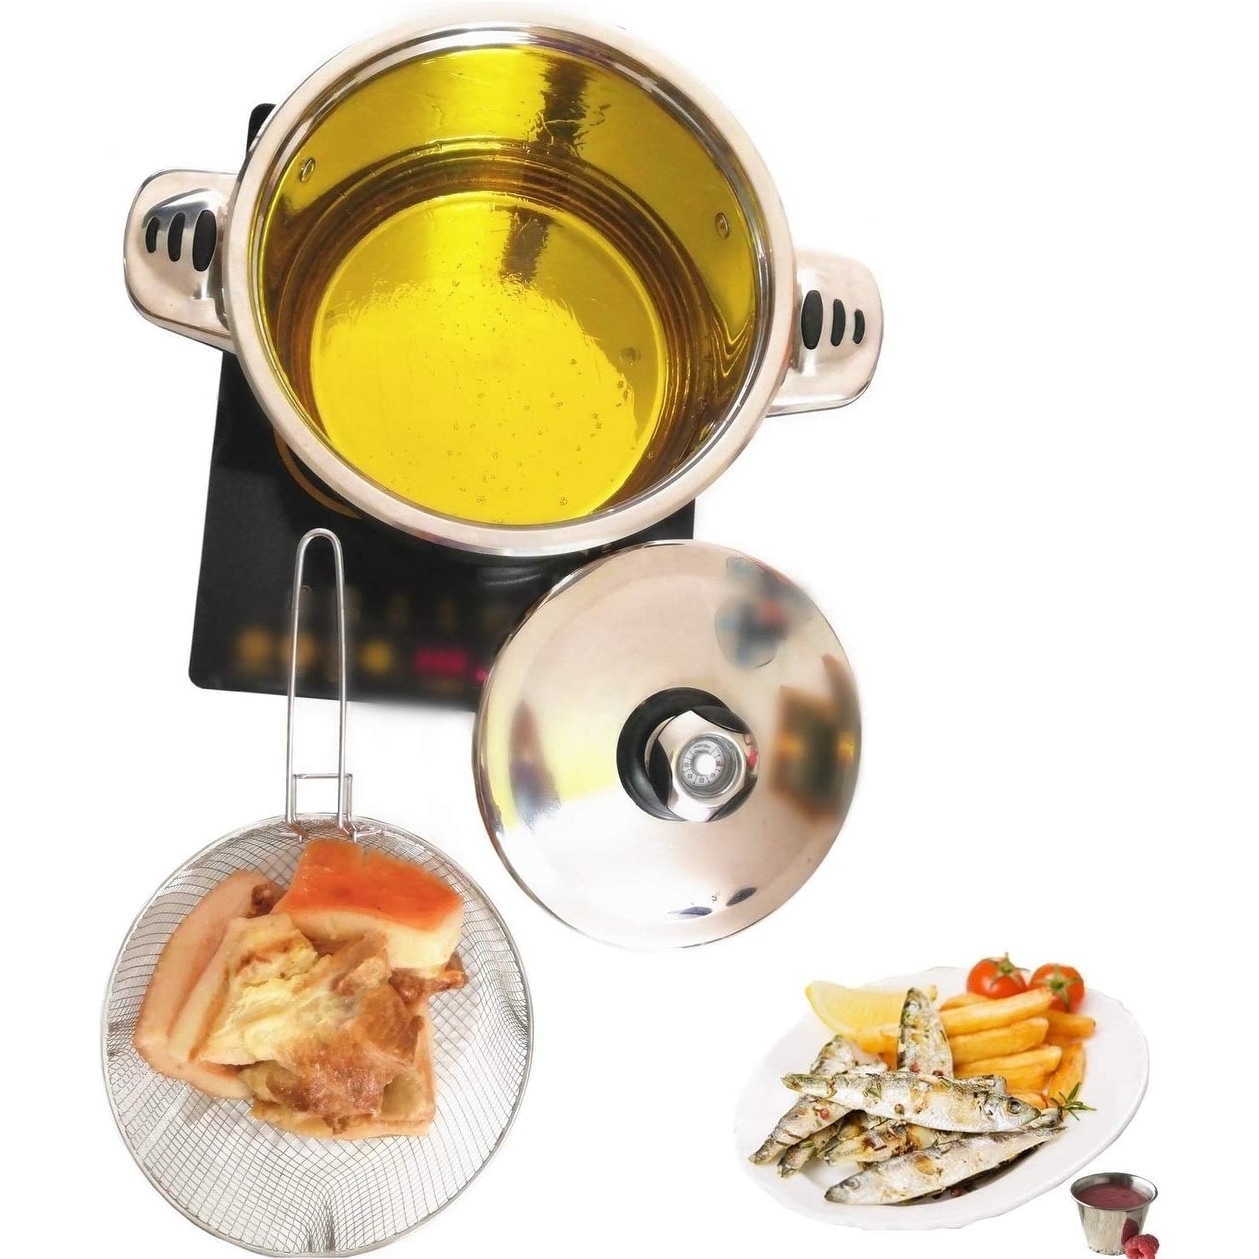 https://ak1.ostkcdn.com/images/products/is/images/direct/b519faa0b3577c53a4db031b2f3138fd2935ee0a/6QT-Deep-Fryer-Set-Stainless-Steel-Deep-Fry-Basket-%26amp%3B-3-Ply-Deep-Frying-Pot-Sauce-Pan-With-Lid.jpg